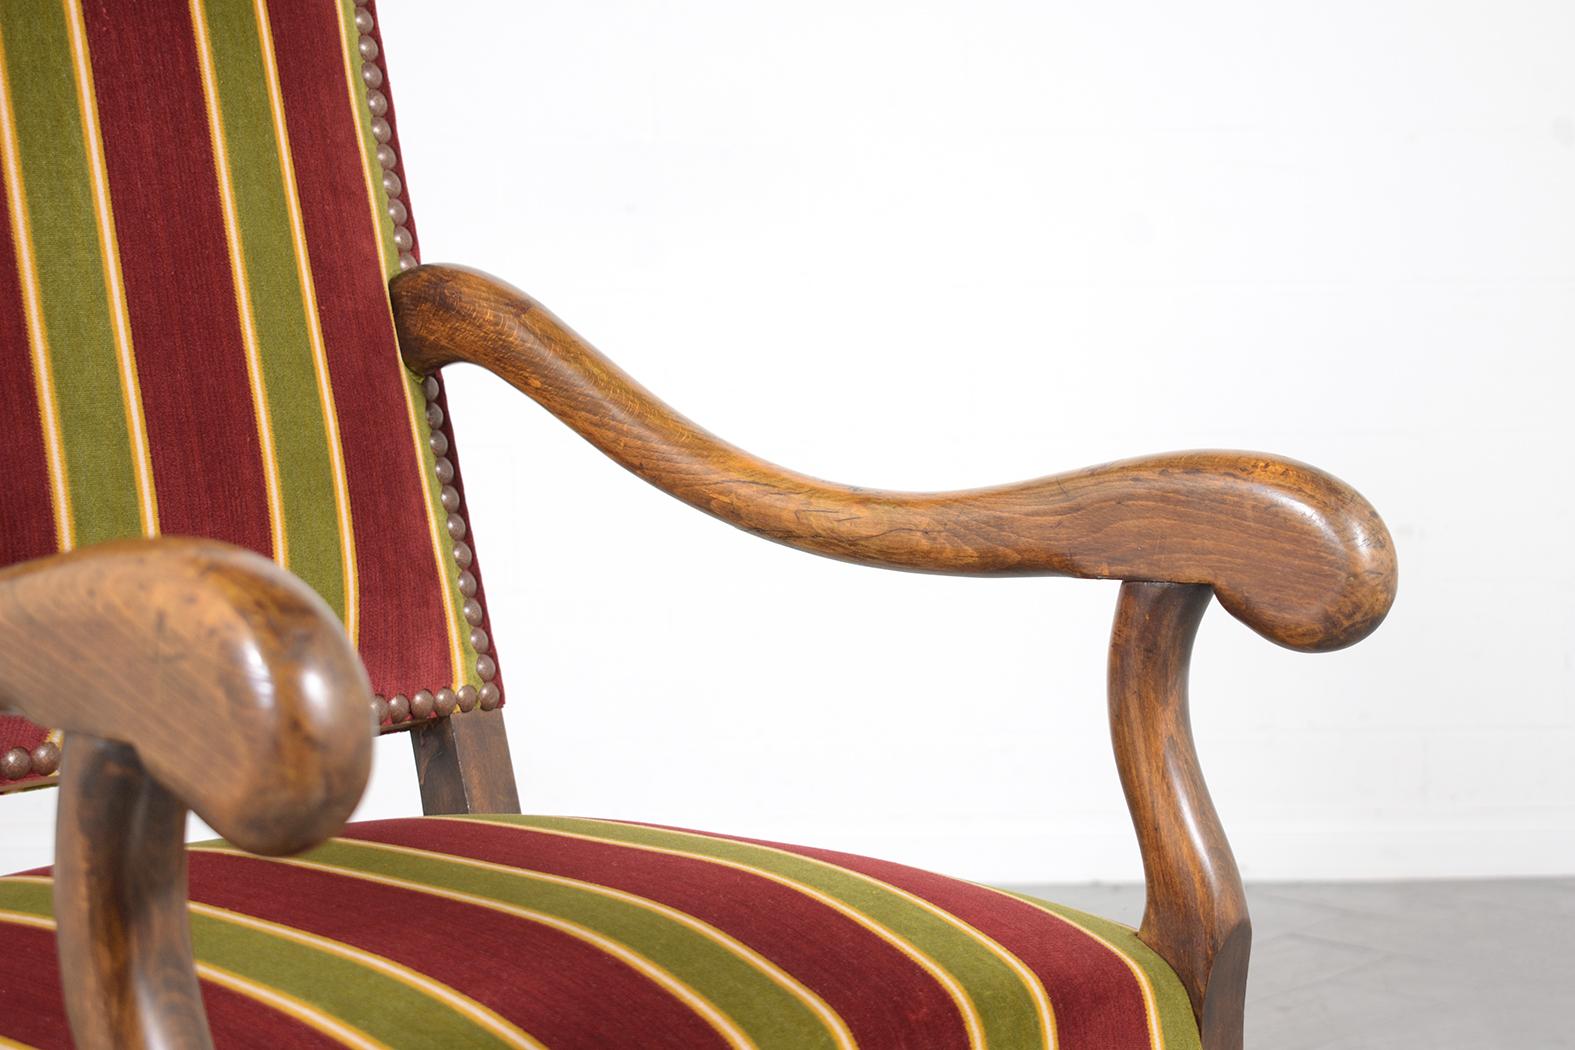 19th Century French Armchairs: Dark Walnut Finish with Striped Velvet Upholstery For Sale 5